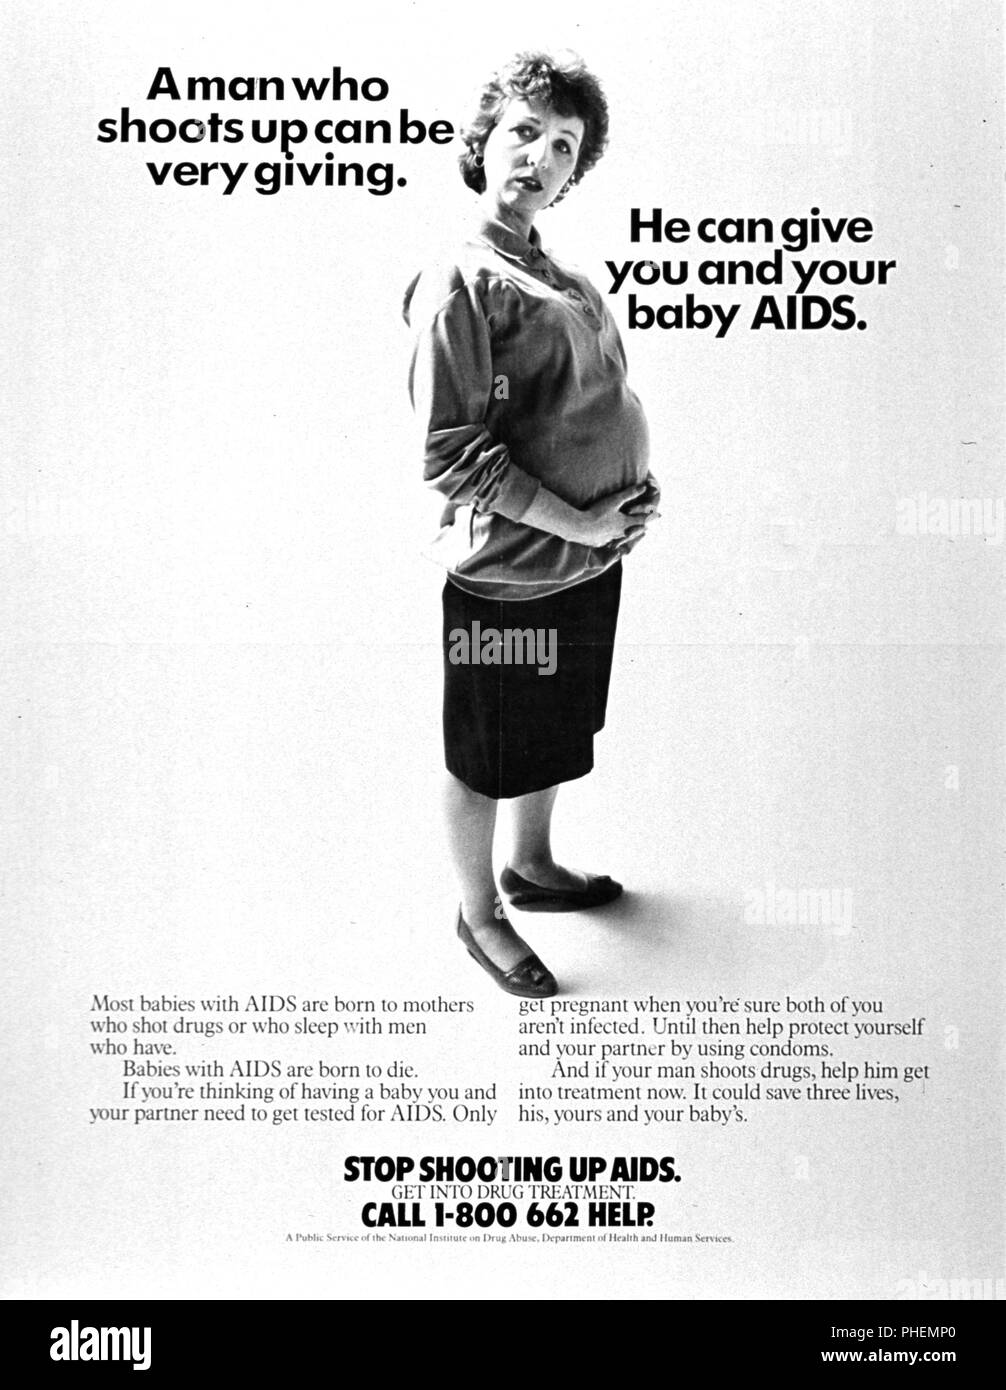 1980s AIDS prevention Poster Stock Photo